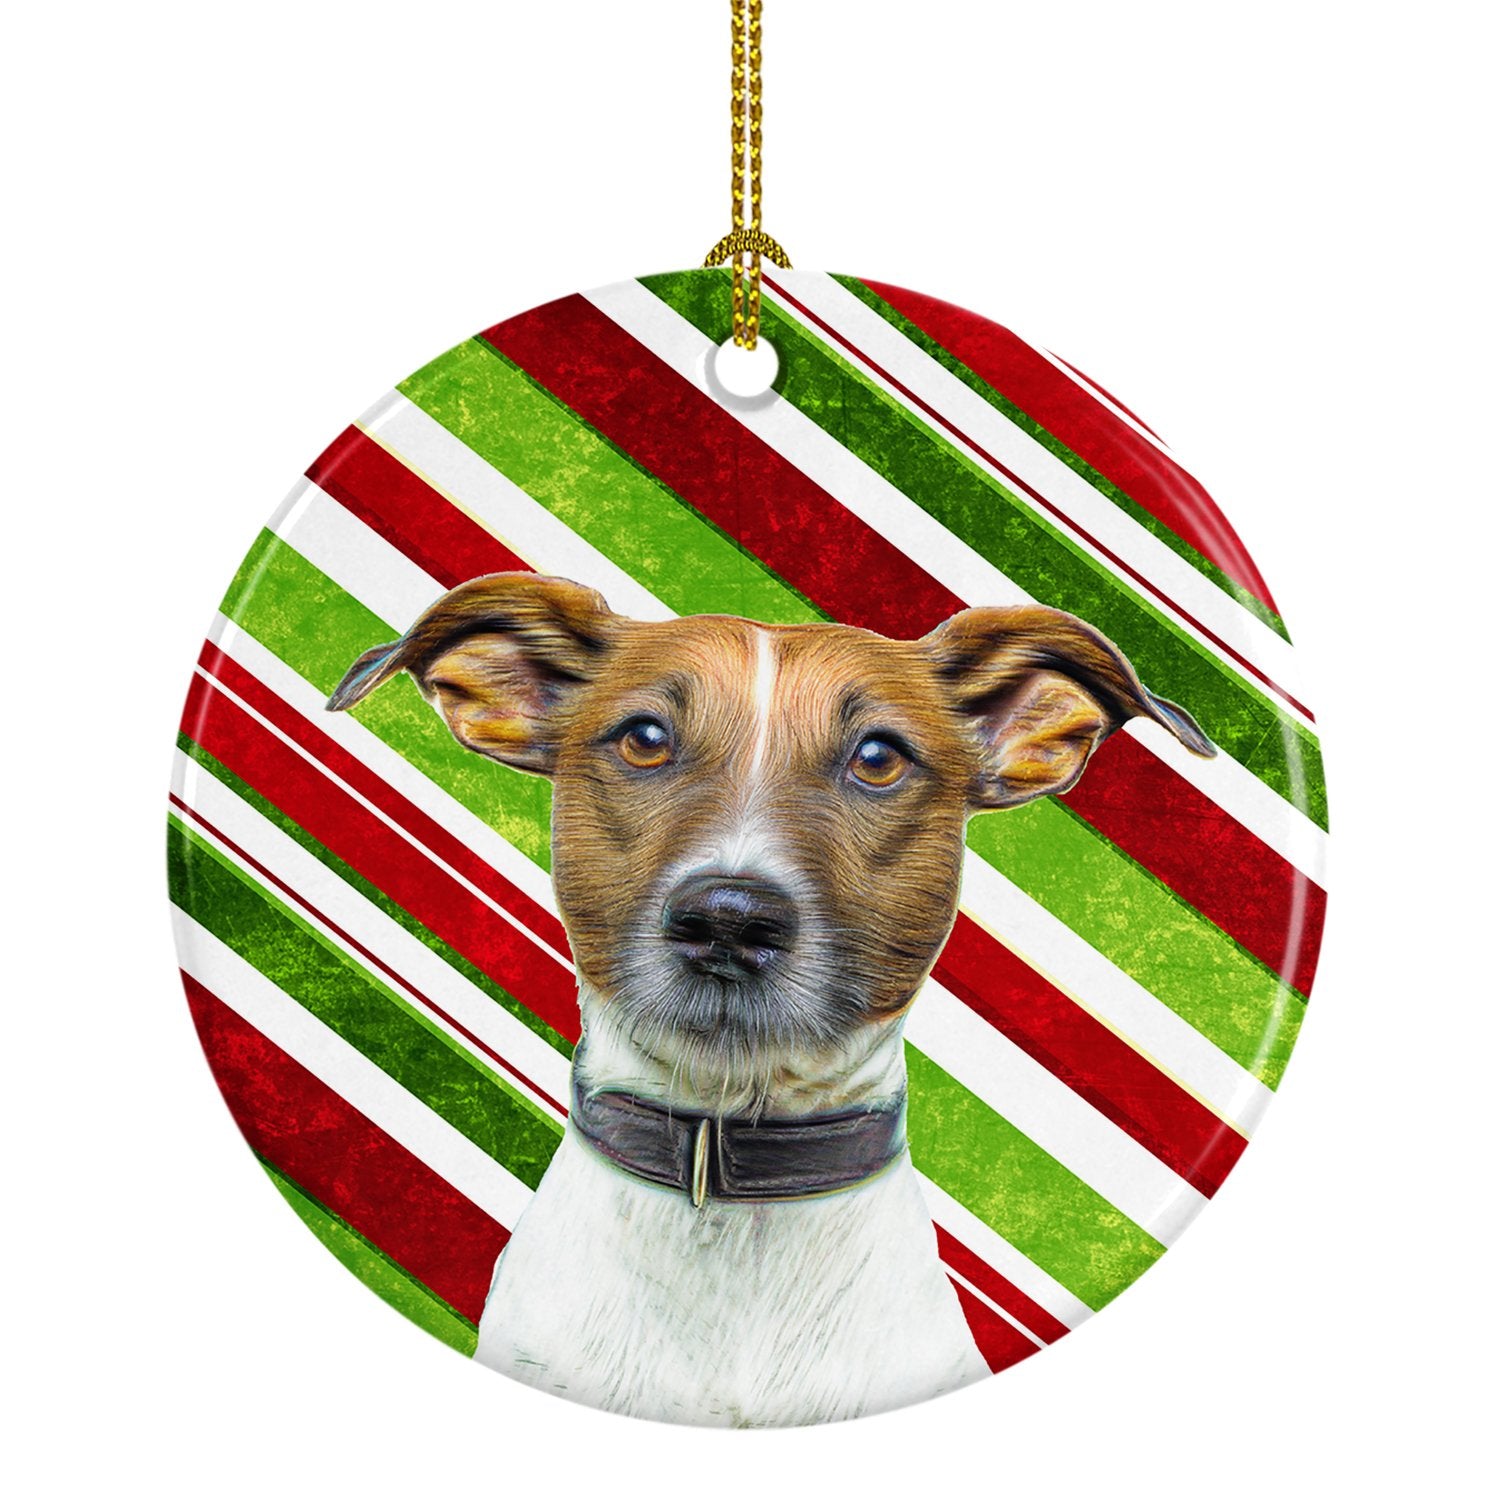 Candy Cane Holiday Christmas Jack Russell Terrier Ceramic Ornament KJ1169CO1 by Caroline's Treasures